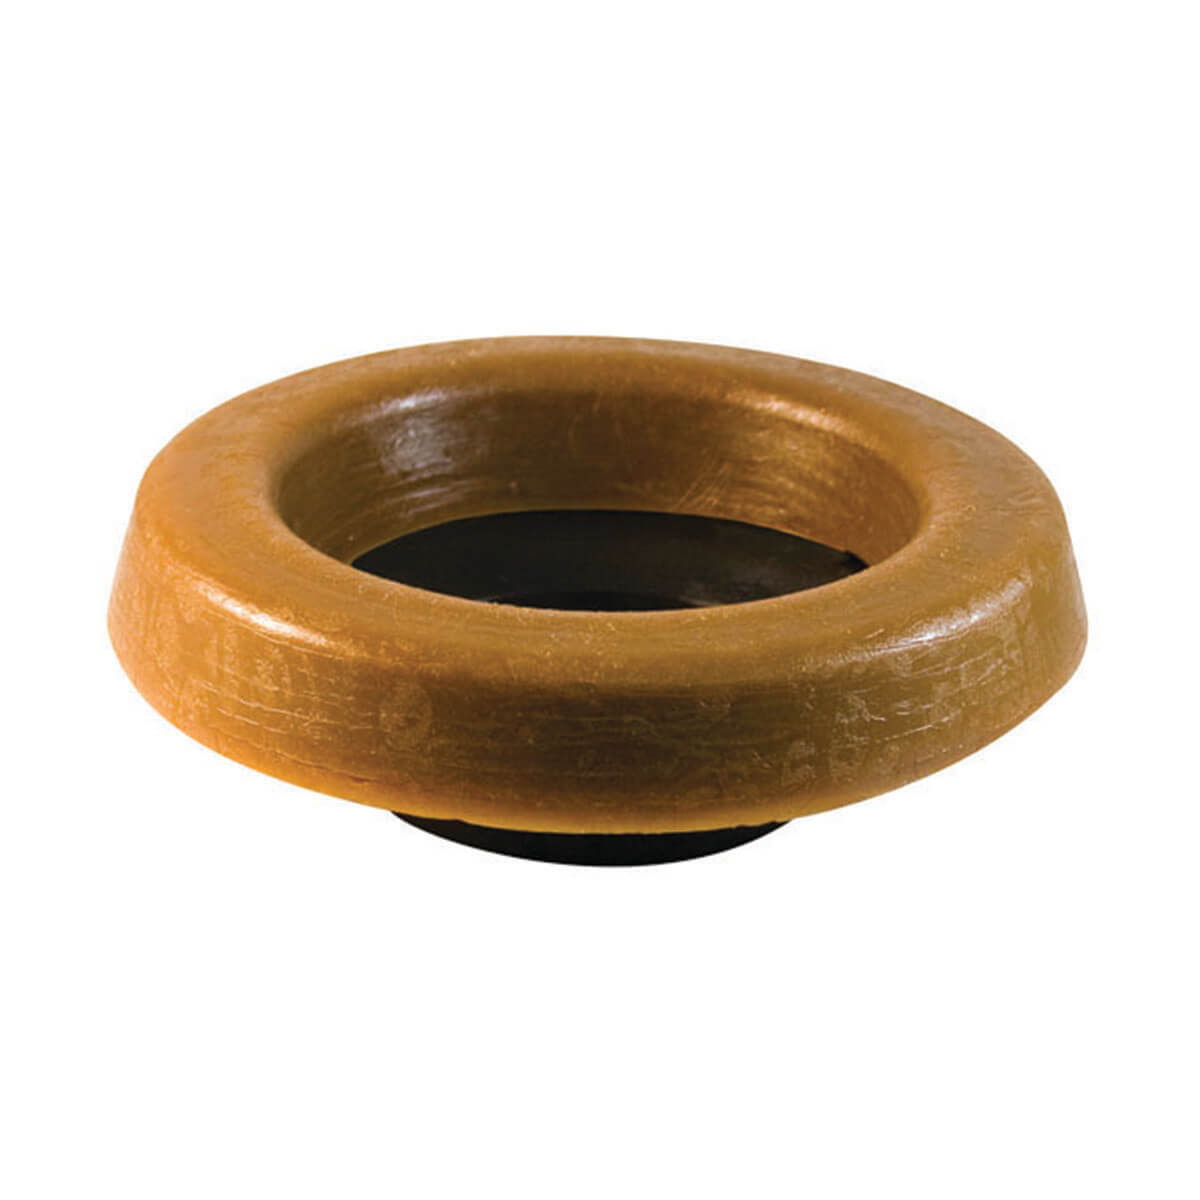 Wax Gasket with Flange